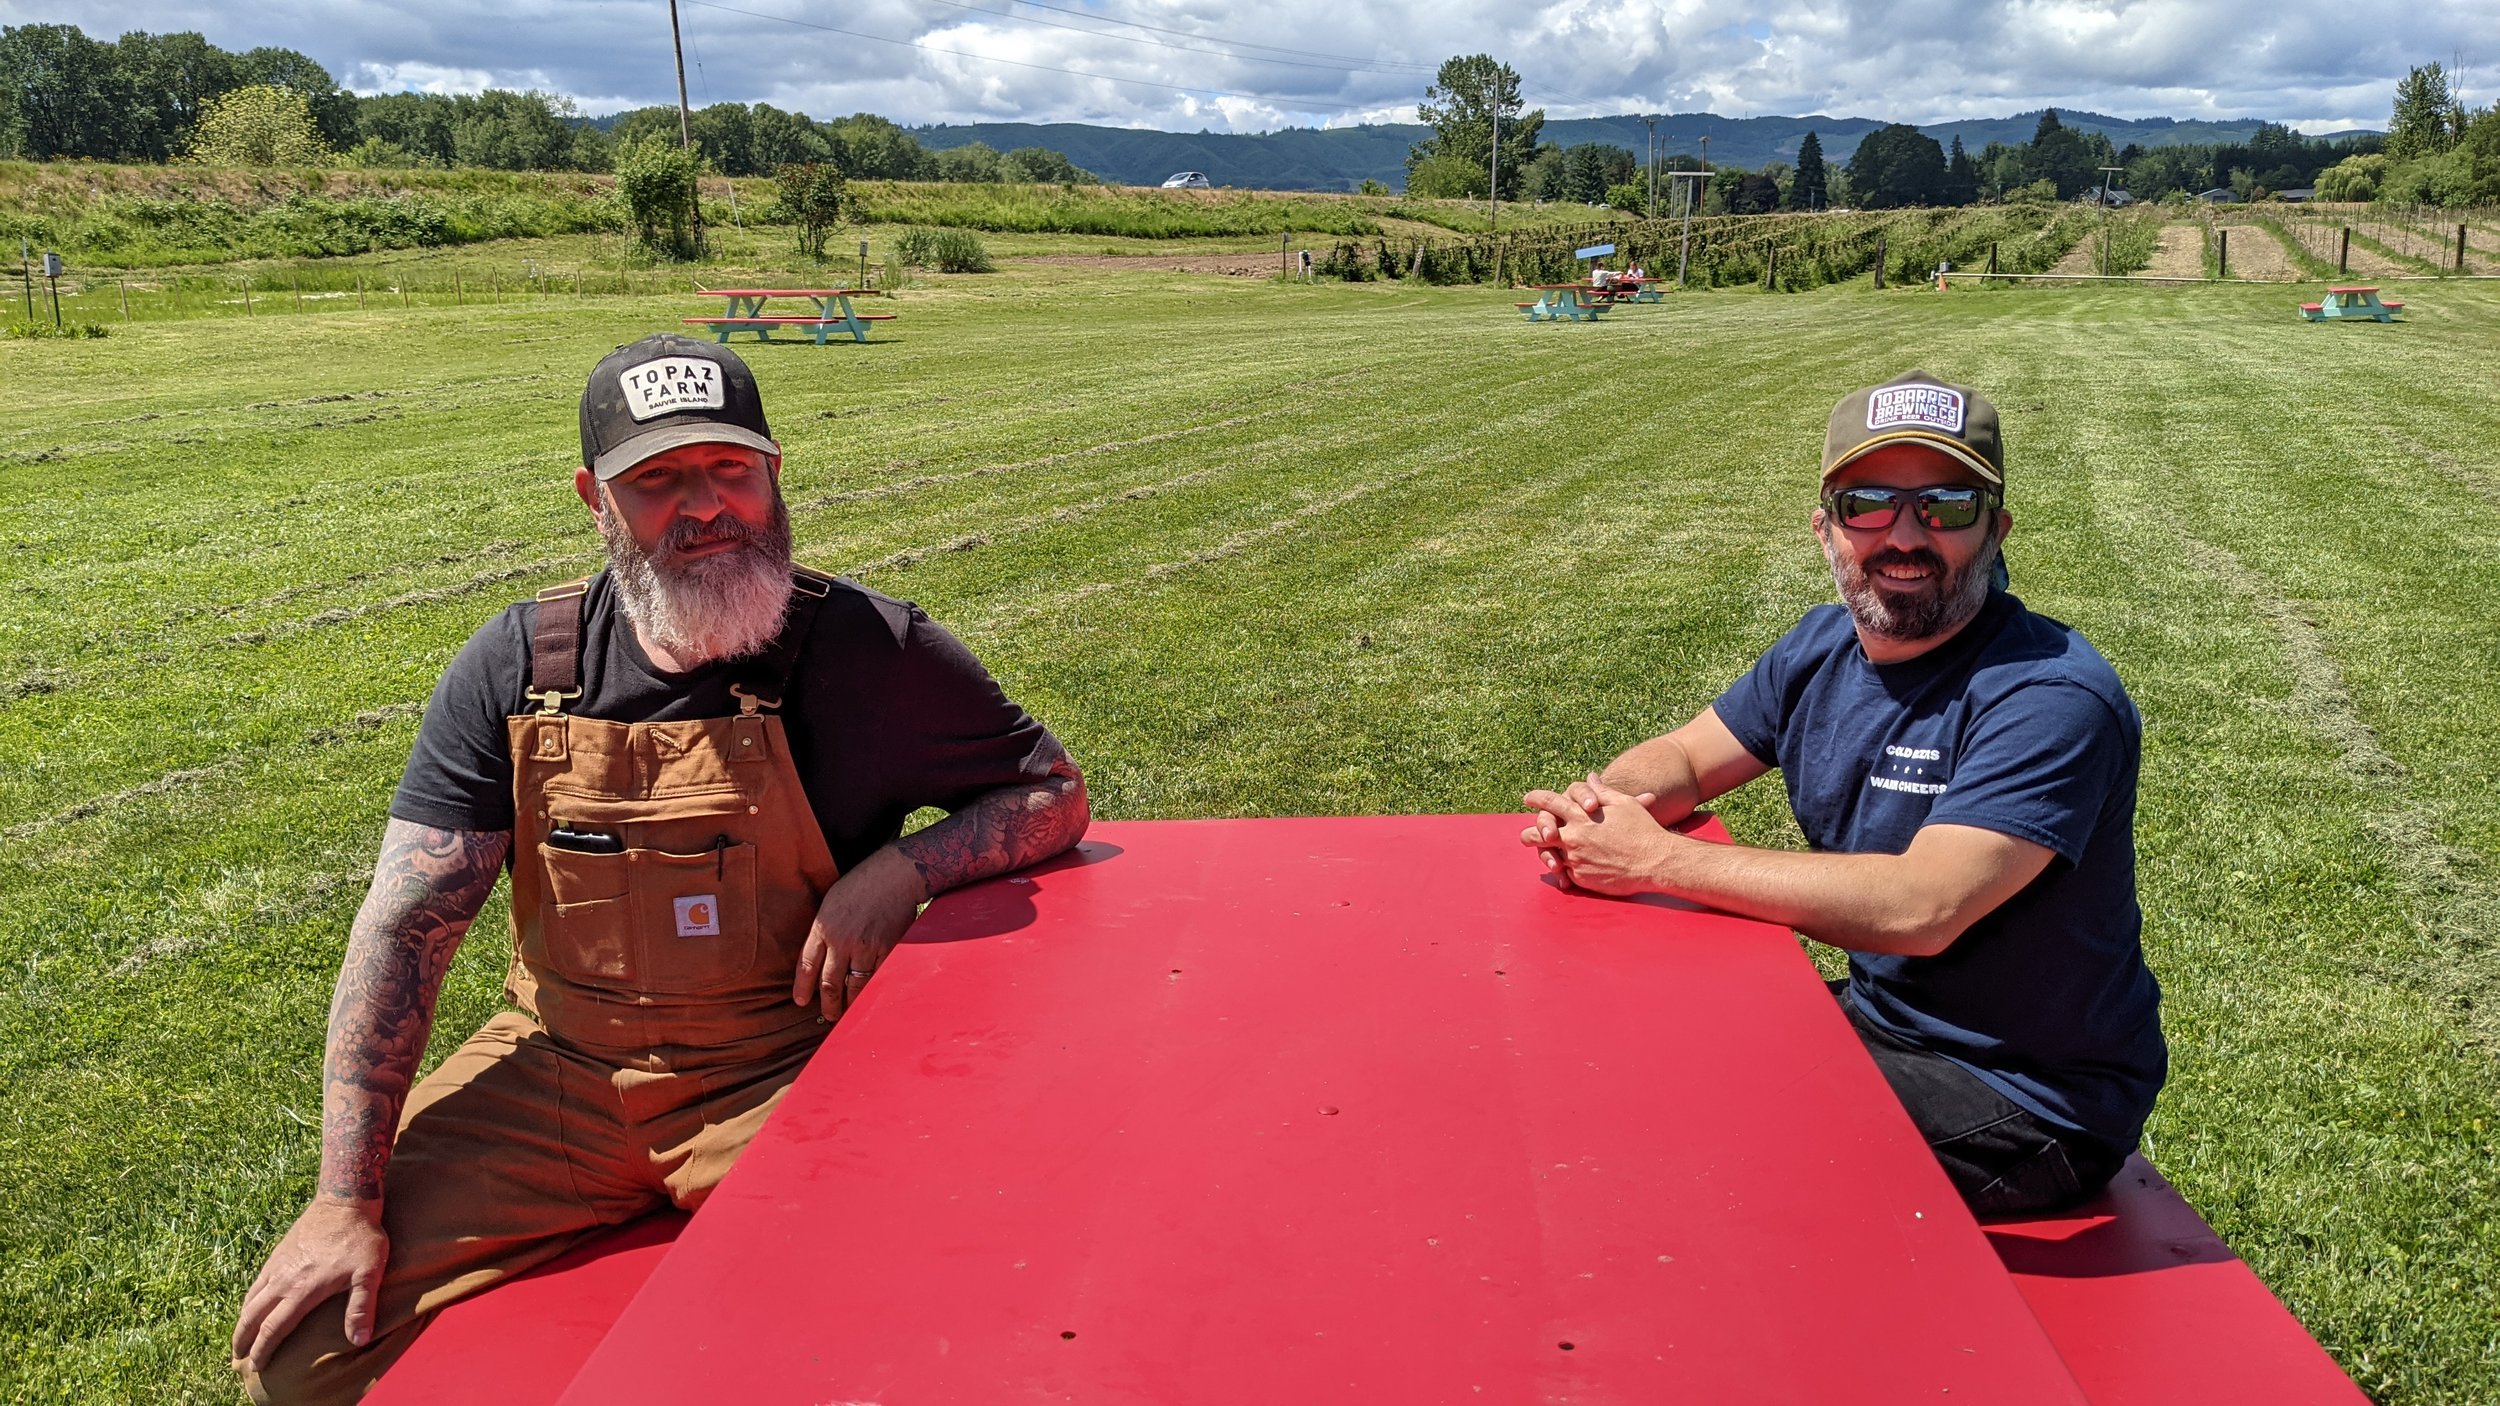  Chef Doug Adams, from Top Chef fame, teamed up with us this summer. First by bringing the Holler truck, then by popping up to smoke pulled pork sandwiches throughout the season. 